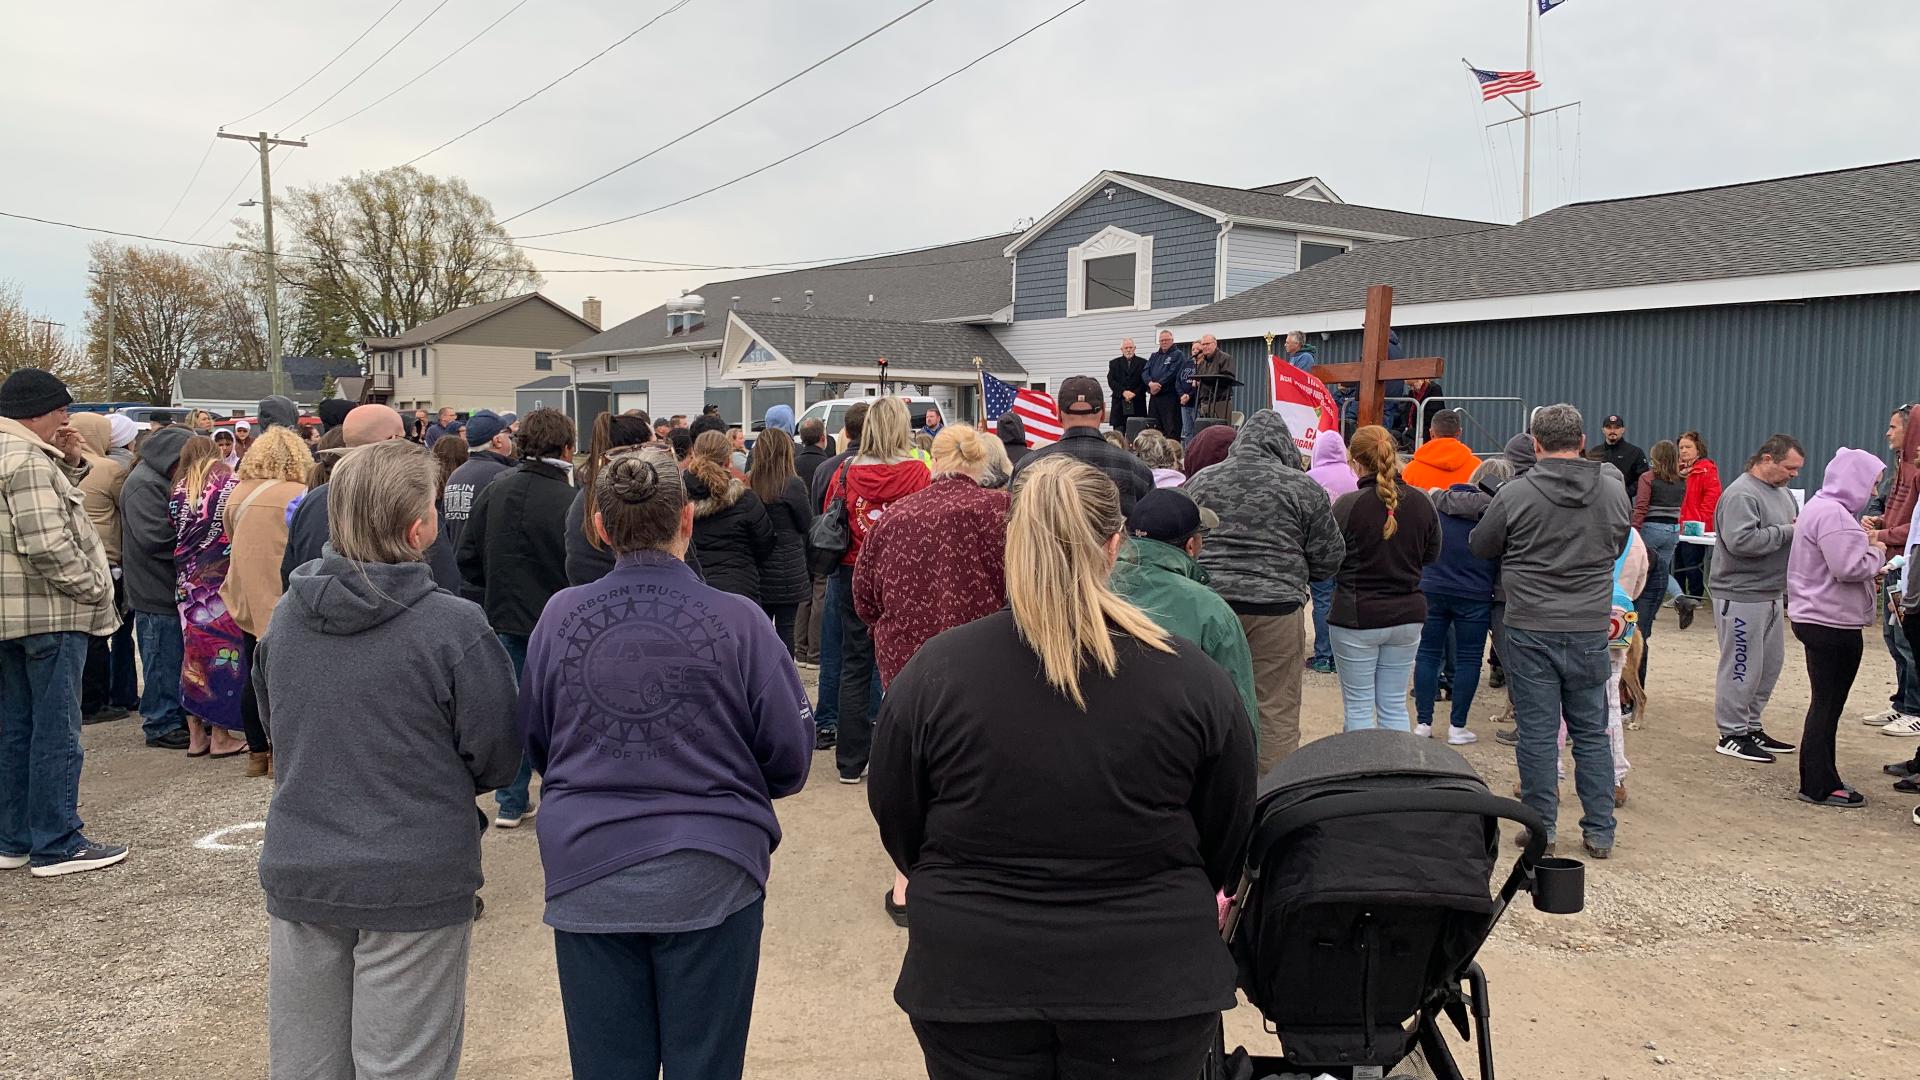 People gathered at the Swan Boat Club Friday for a candlelight vigil dedicated to victims of the crash that killed two siblings and injured several others.